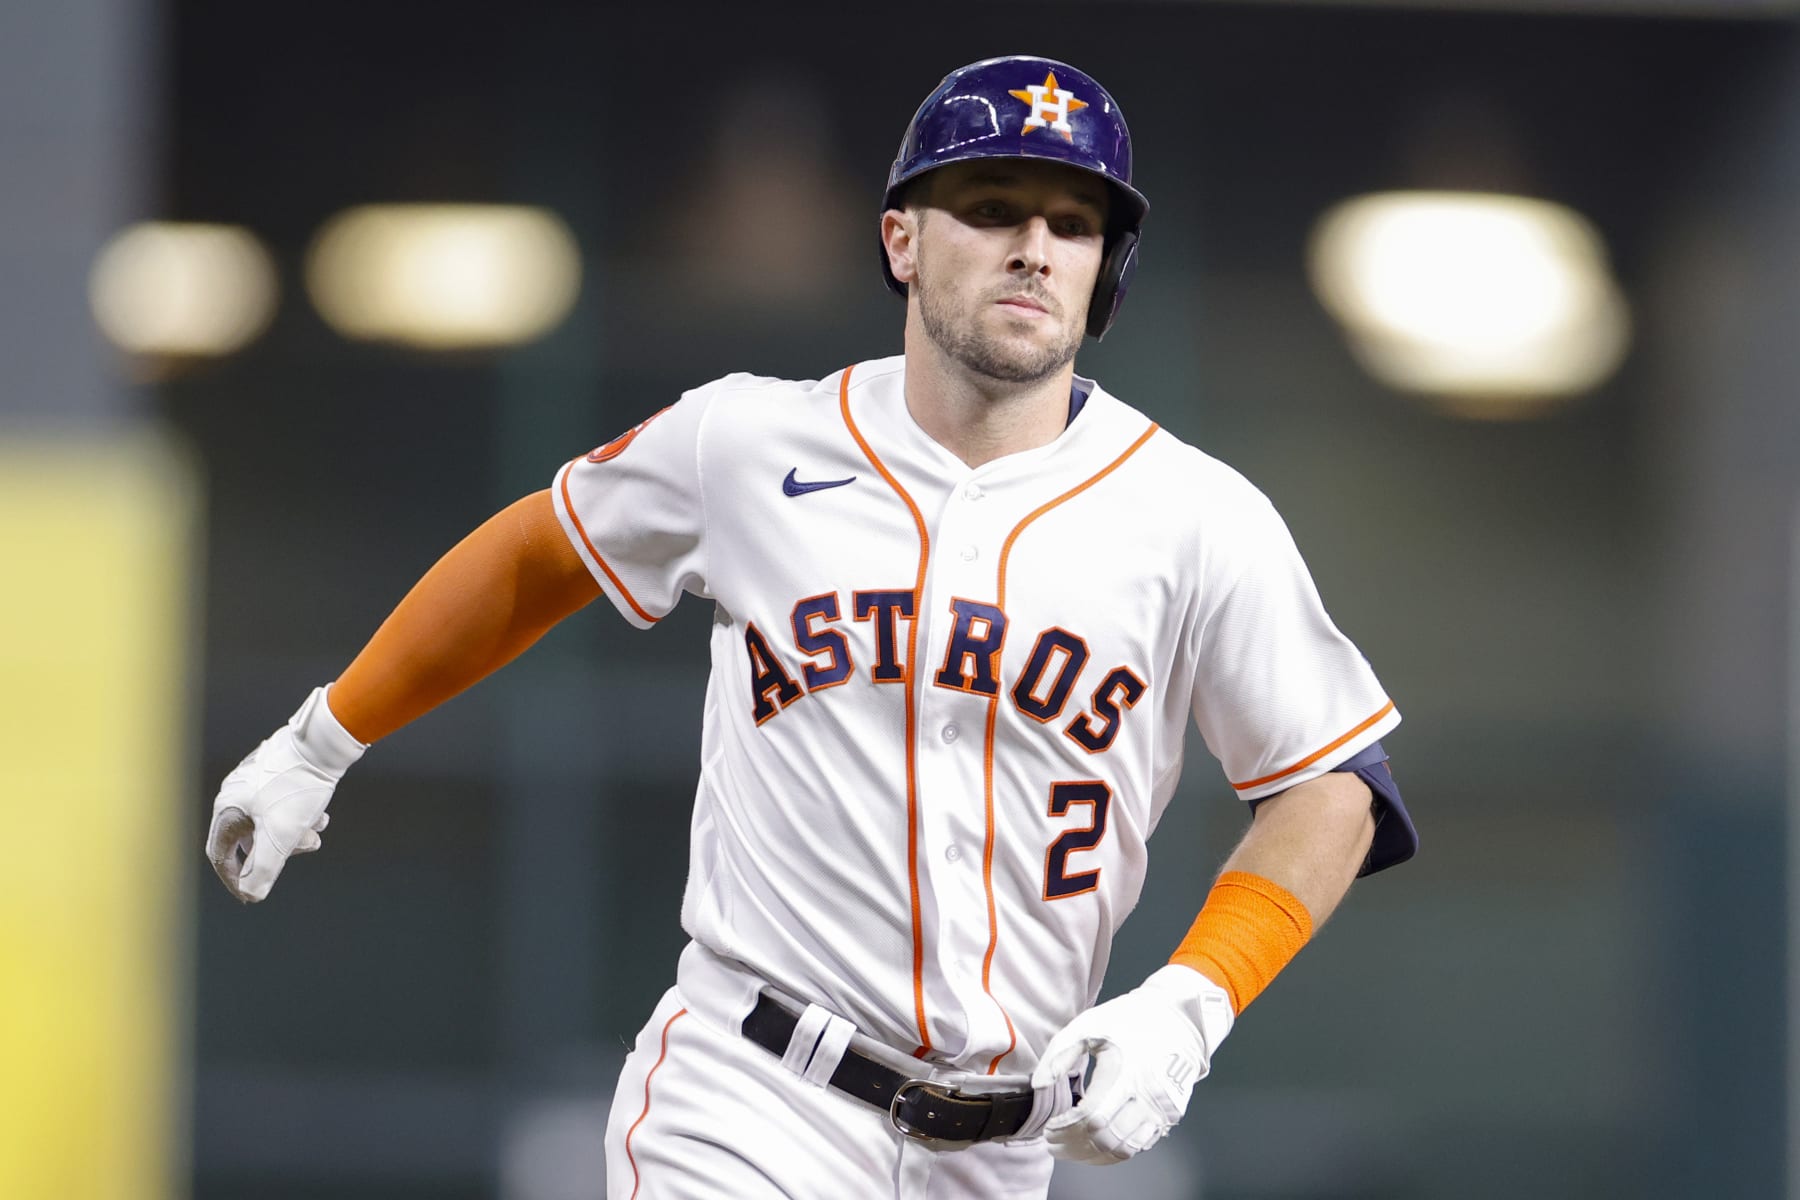 ESPN Stats & Info on X: Kyle Tucker is the 3rd Astros player with a 3 HR  game on the road over the last 20 seasons. He joins Yordan Alvarez and  Carlos